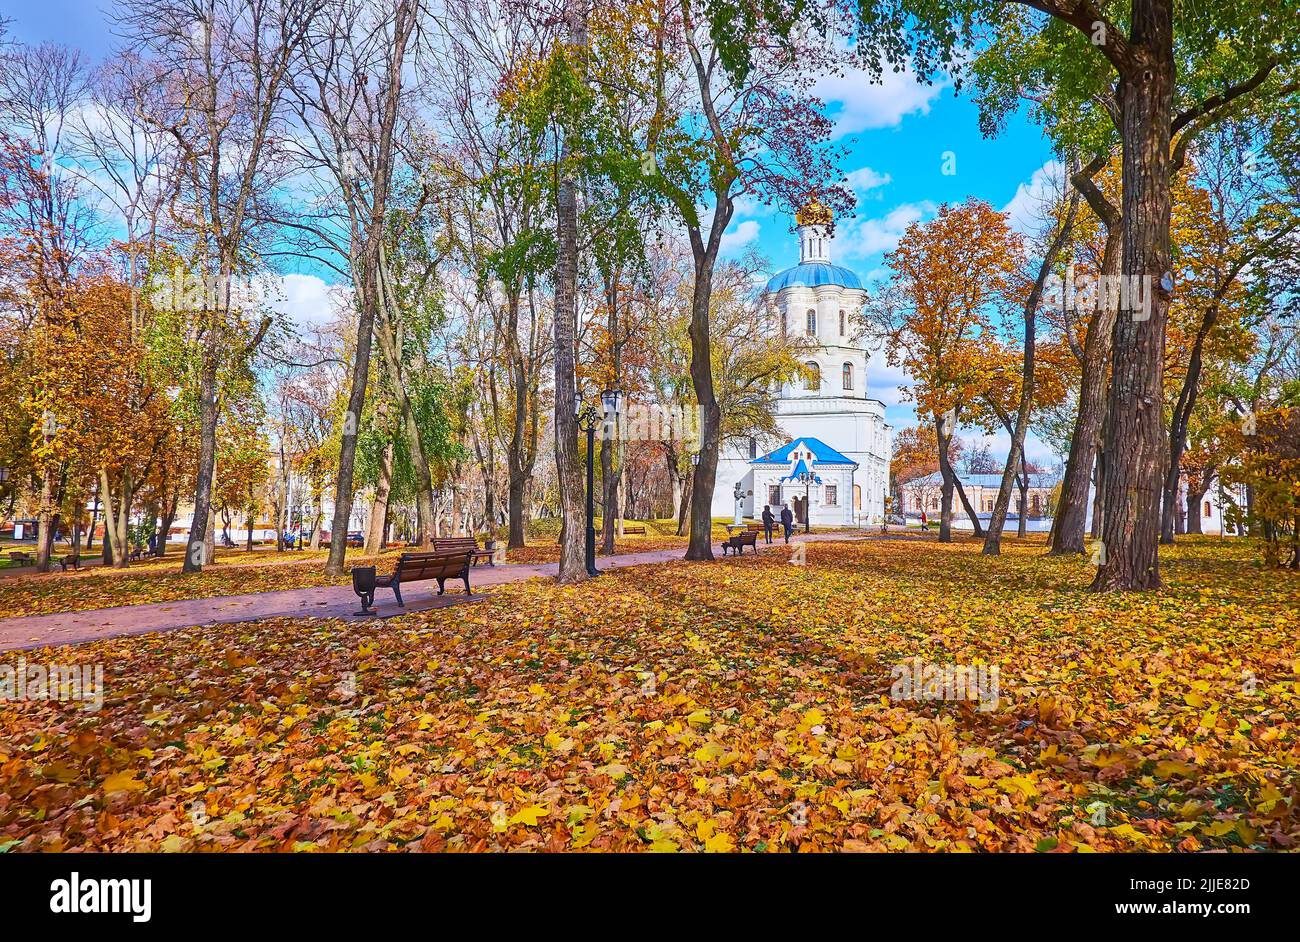 Enjoy the golden autumn season in the old Chernihiv Dytynets (Chernigov Citadel) Park with a view on the carpet of leaves on the floor and the medieva Stock Photo